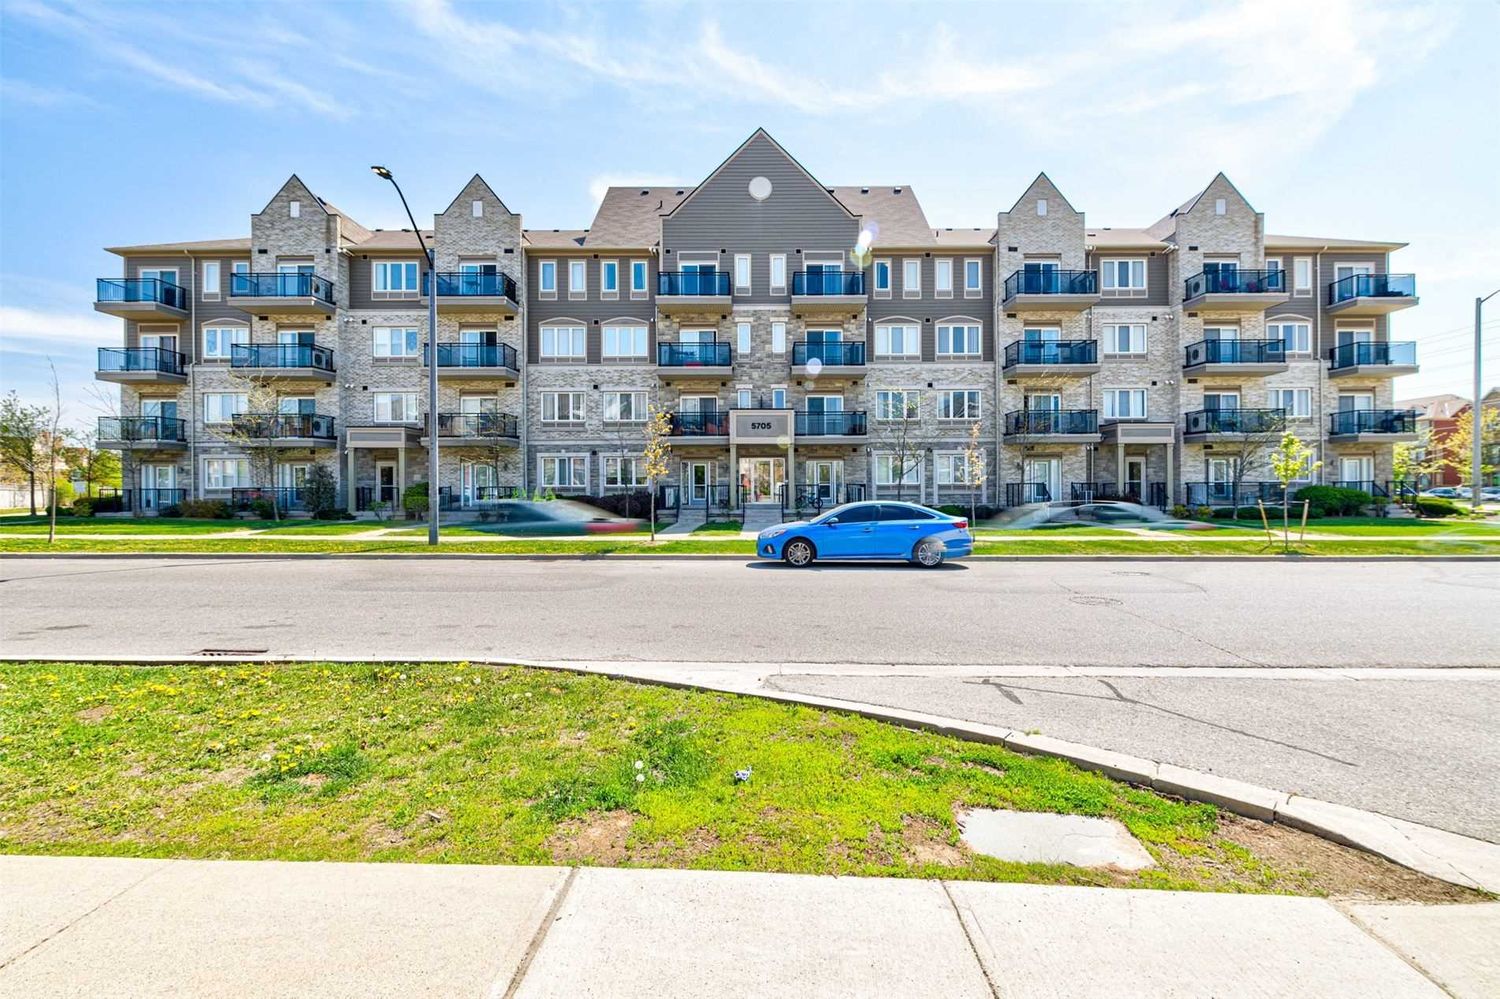 5705 Long Valley Road. Long Valley Townhomes - Phases I & II is located in  Mississauga, Toronto - image #1 of 2